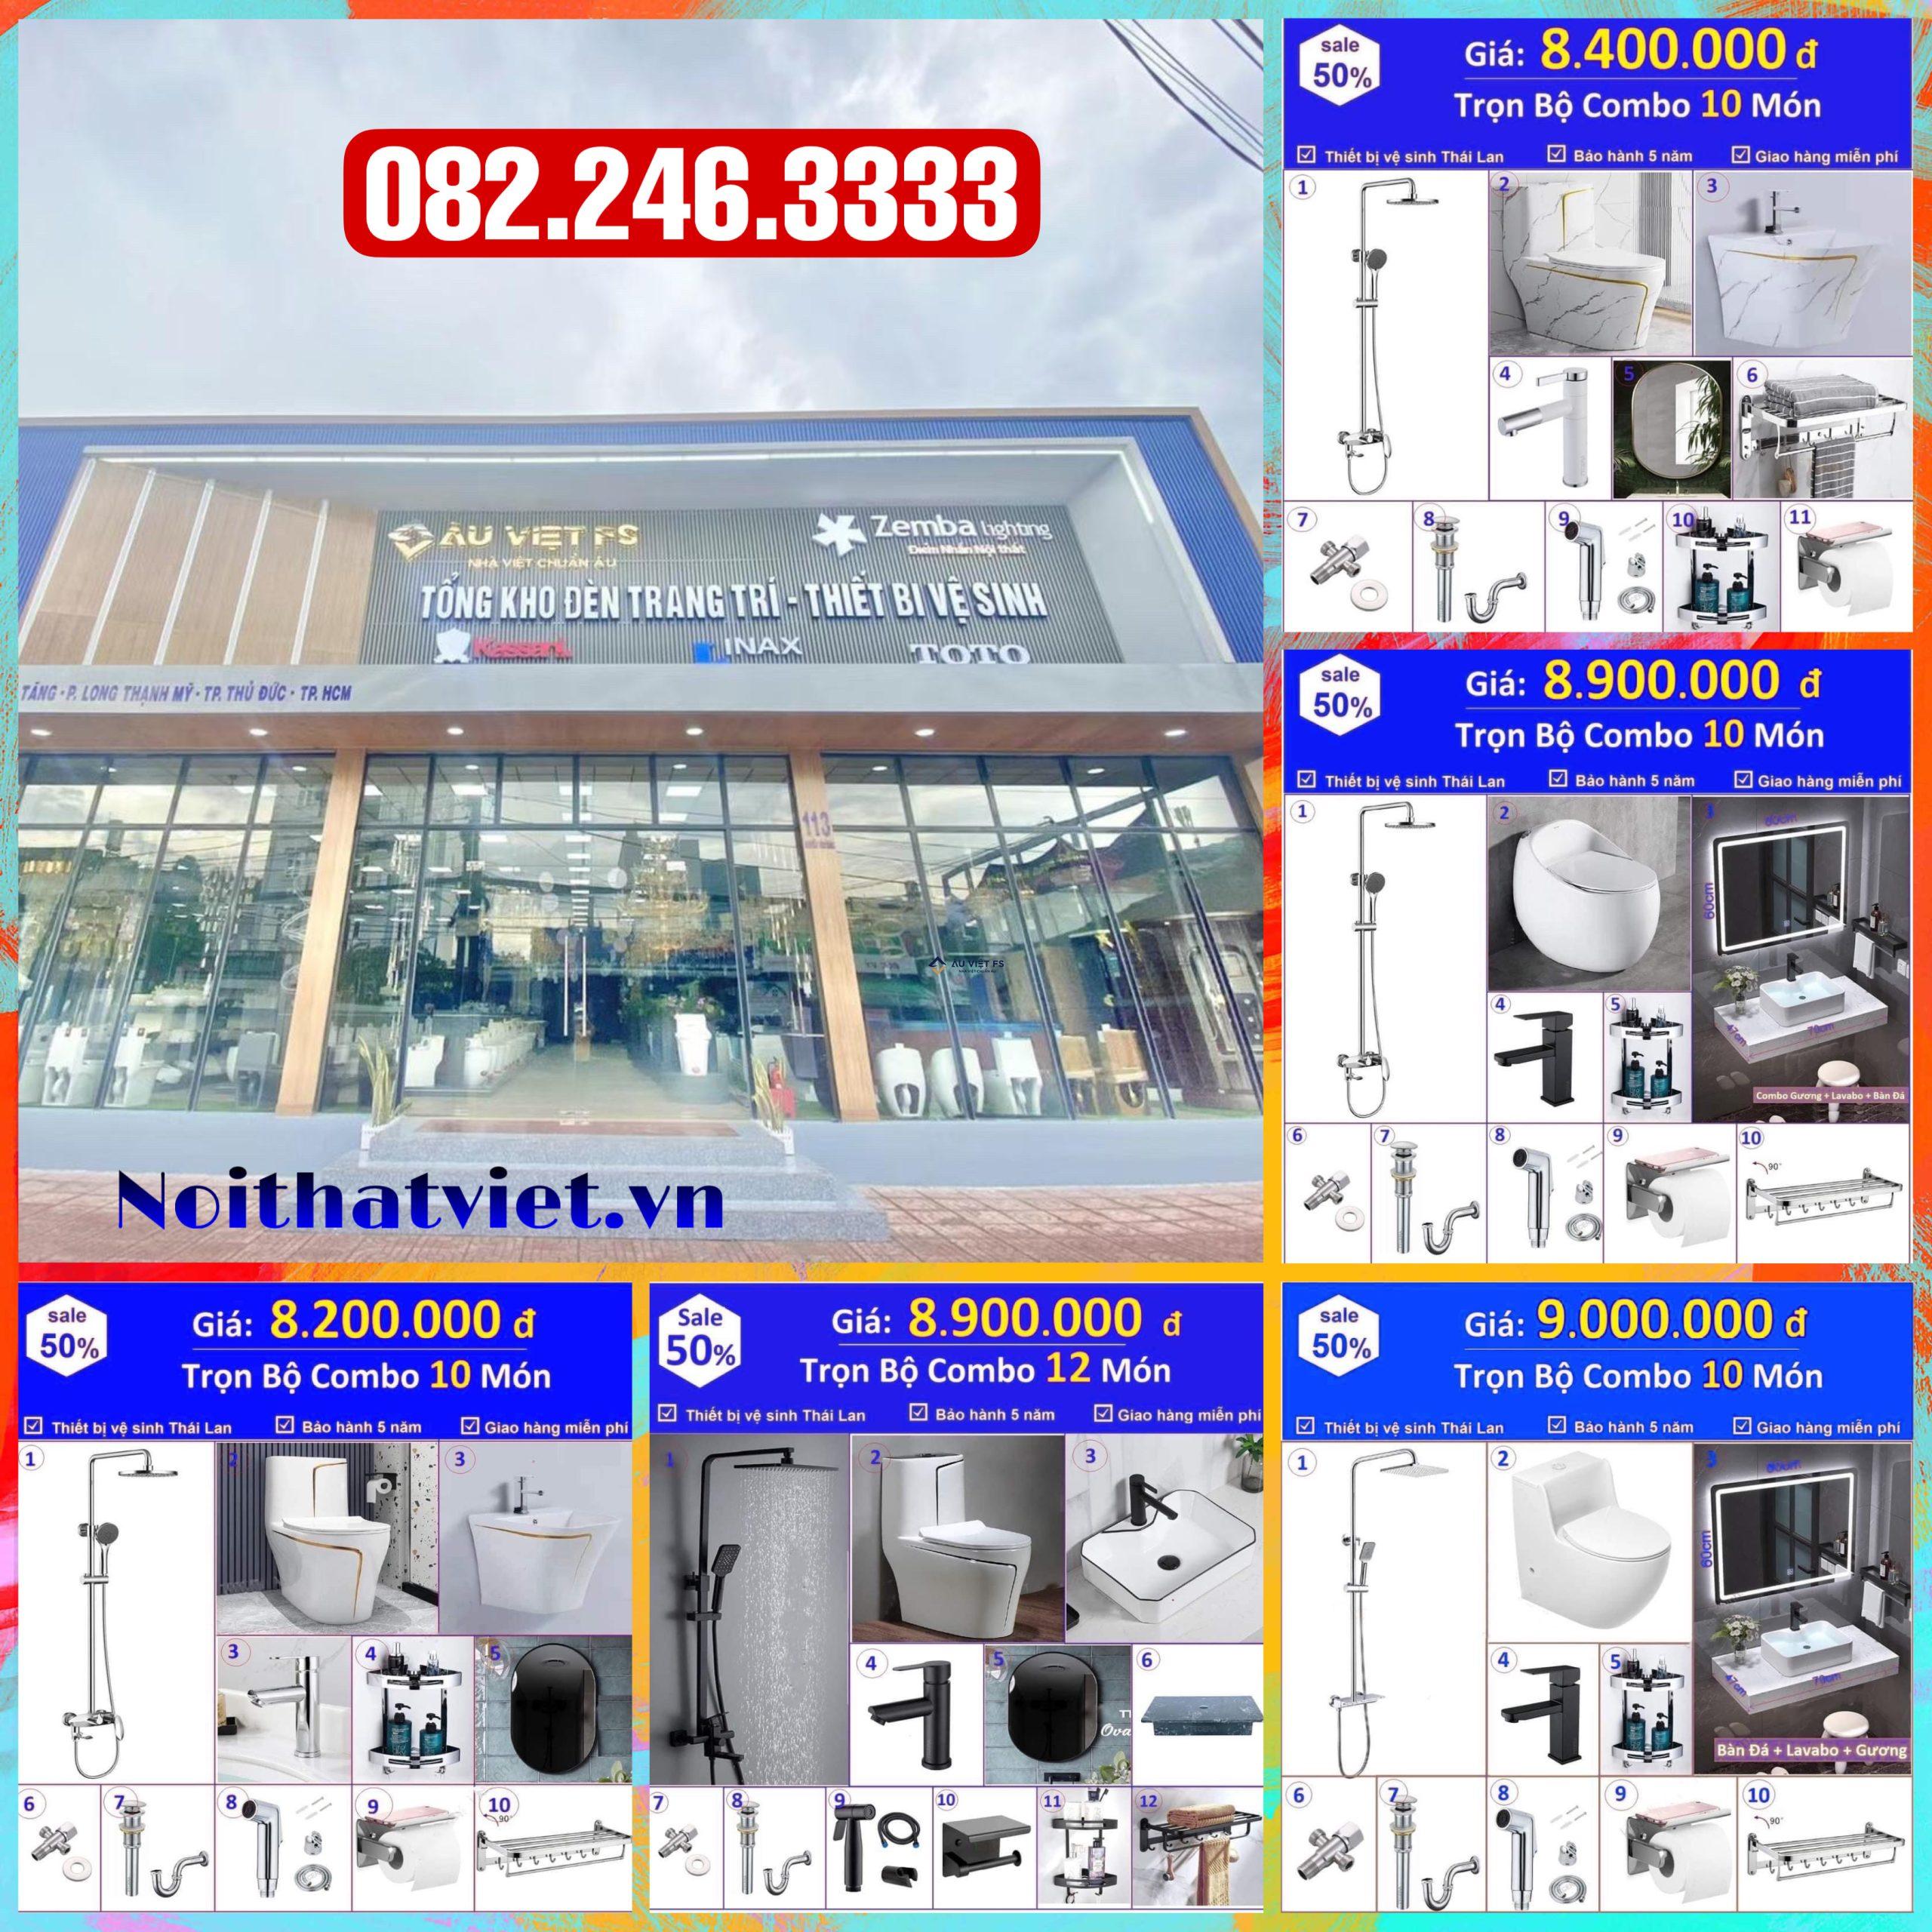 Combo thiết bị vệ sinh 2024, Combo Inax 2024, Combo TOTO 2024, Combo thiết bị vệ sinh Inax, Combo thiết bị vệ sinh TOTO, Combo thiết bị vệ sinh Viglacera, Combo thiết bị vệ sinh Caesar, Combo thiết bị vệ sinh giá rẻ, Trọn bộ thiết bị vệ sinh phòng tắm Inax, Trọn bộ thiết bị vệ sinh phòng tắm Viglacera, Giá trọn bộ thiết bị vệ sinh TOTO, Giá combo thiết bị vệ sinh Inax, Combo thiết bị vệ sinh TOTO, Combo thiết bị vệ sinh giá rẻ TPHCM, Combo thiết bị vệ sinh giá rẻ Hà Nội, Thiết bị nhà vệ sinh, Thiết bị vệ sinh, Giá Thiết bị vệ sinh 2024 